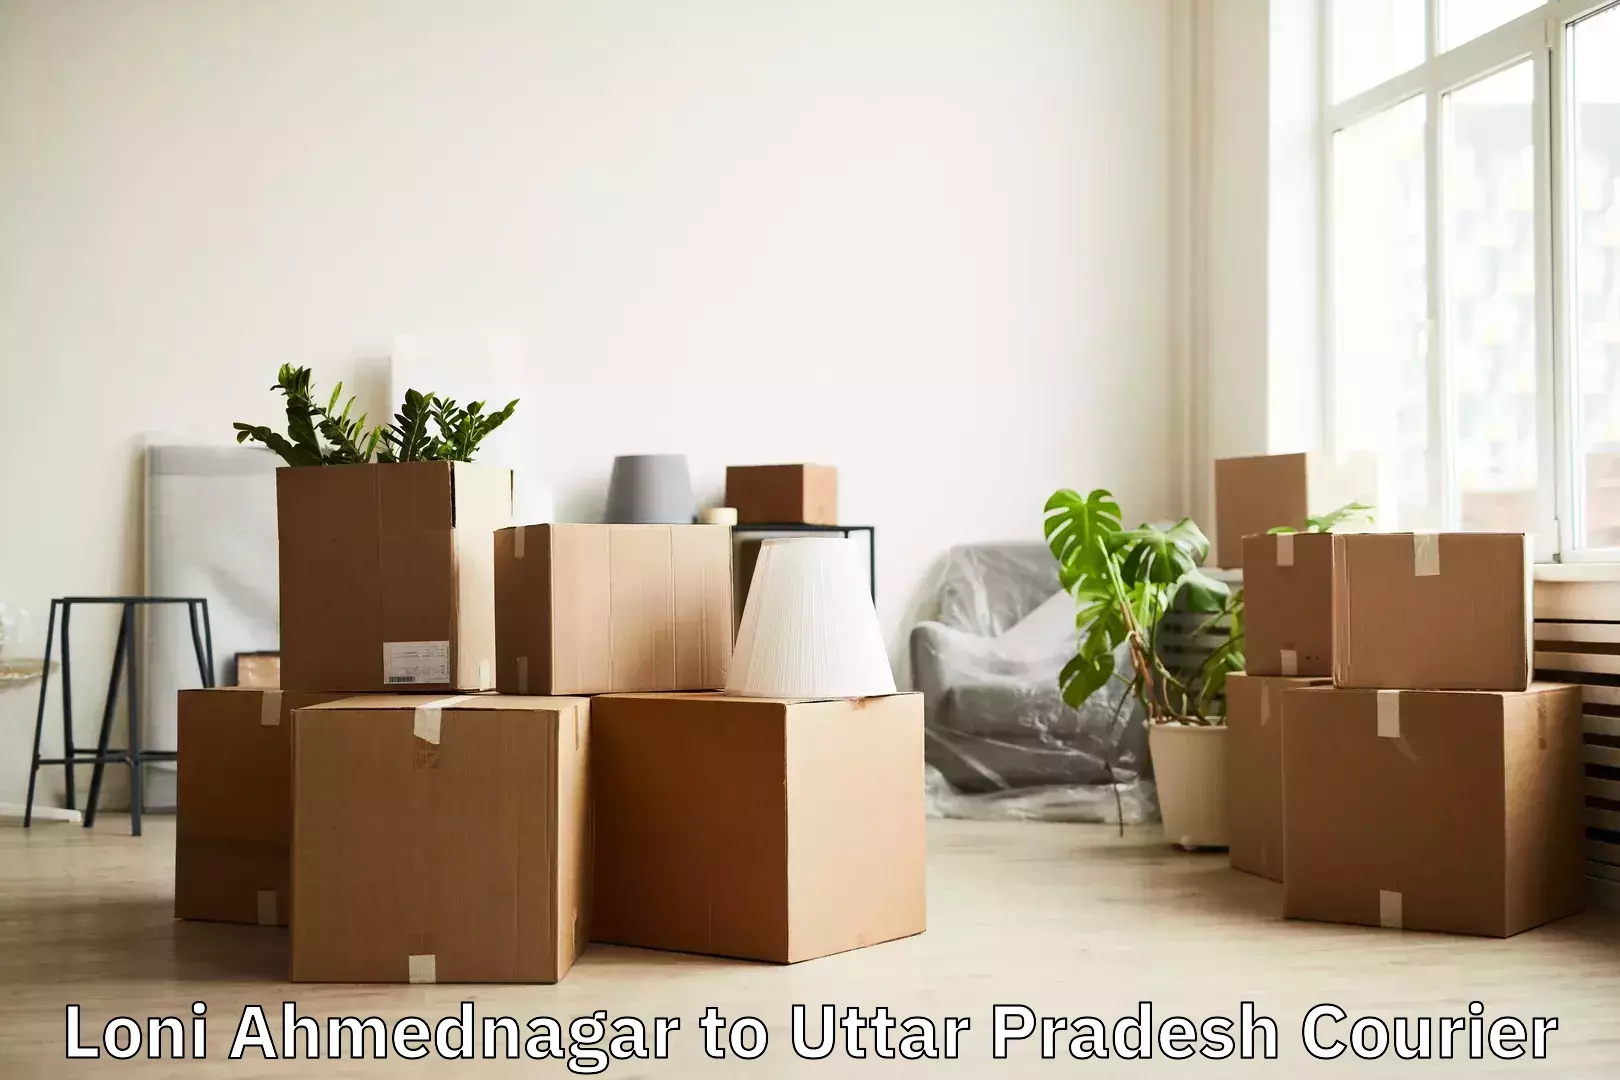 Baggage relocation service Loni Ahmednagar to Shahjahanpur